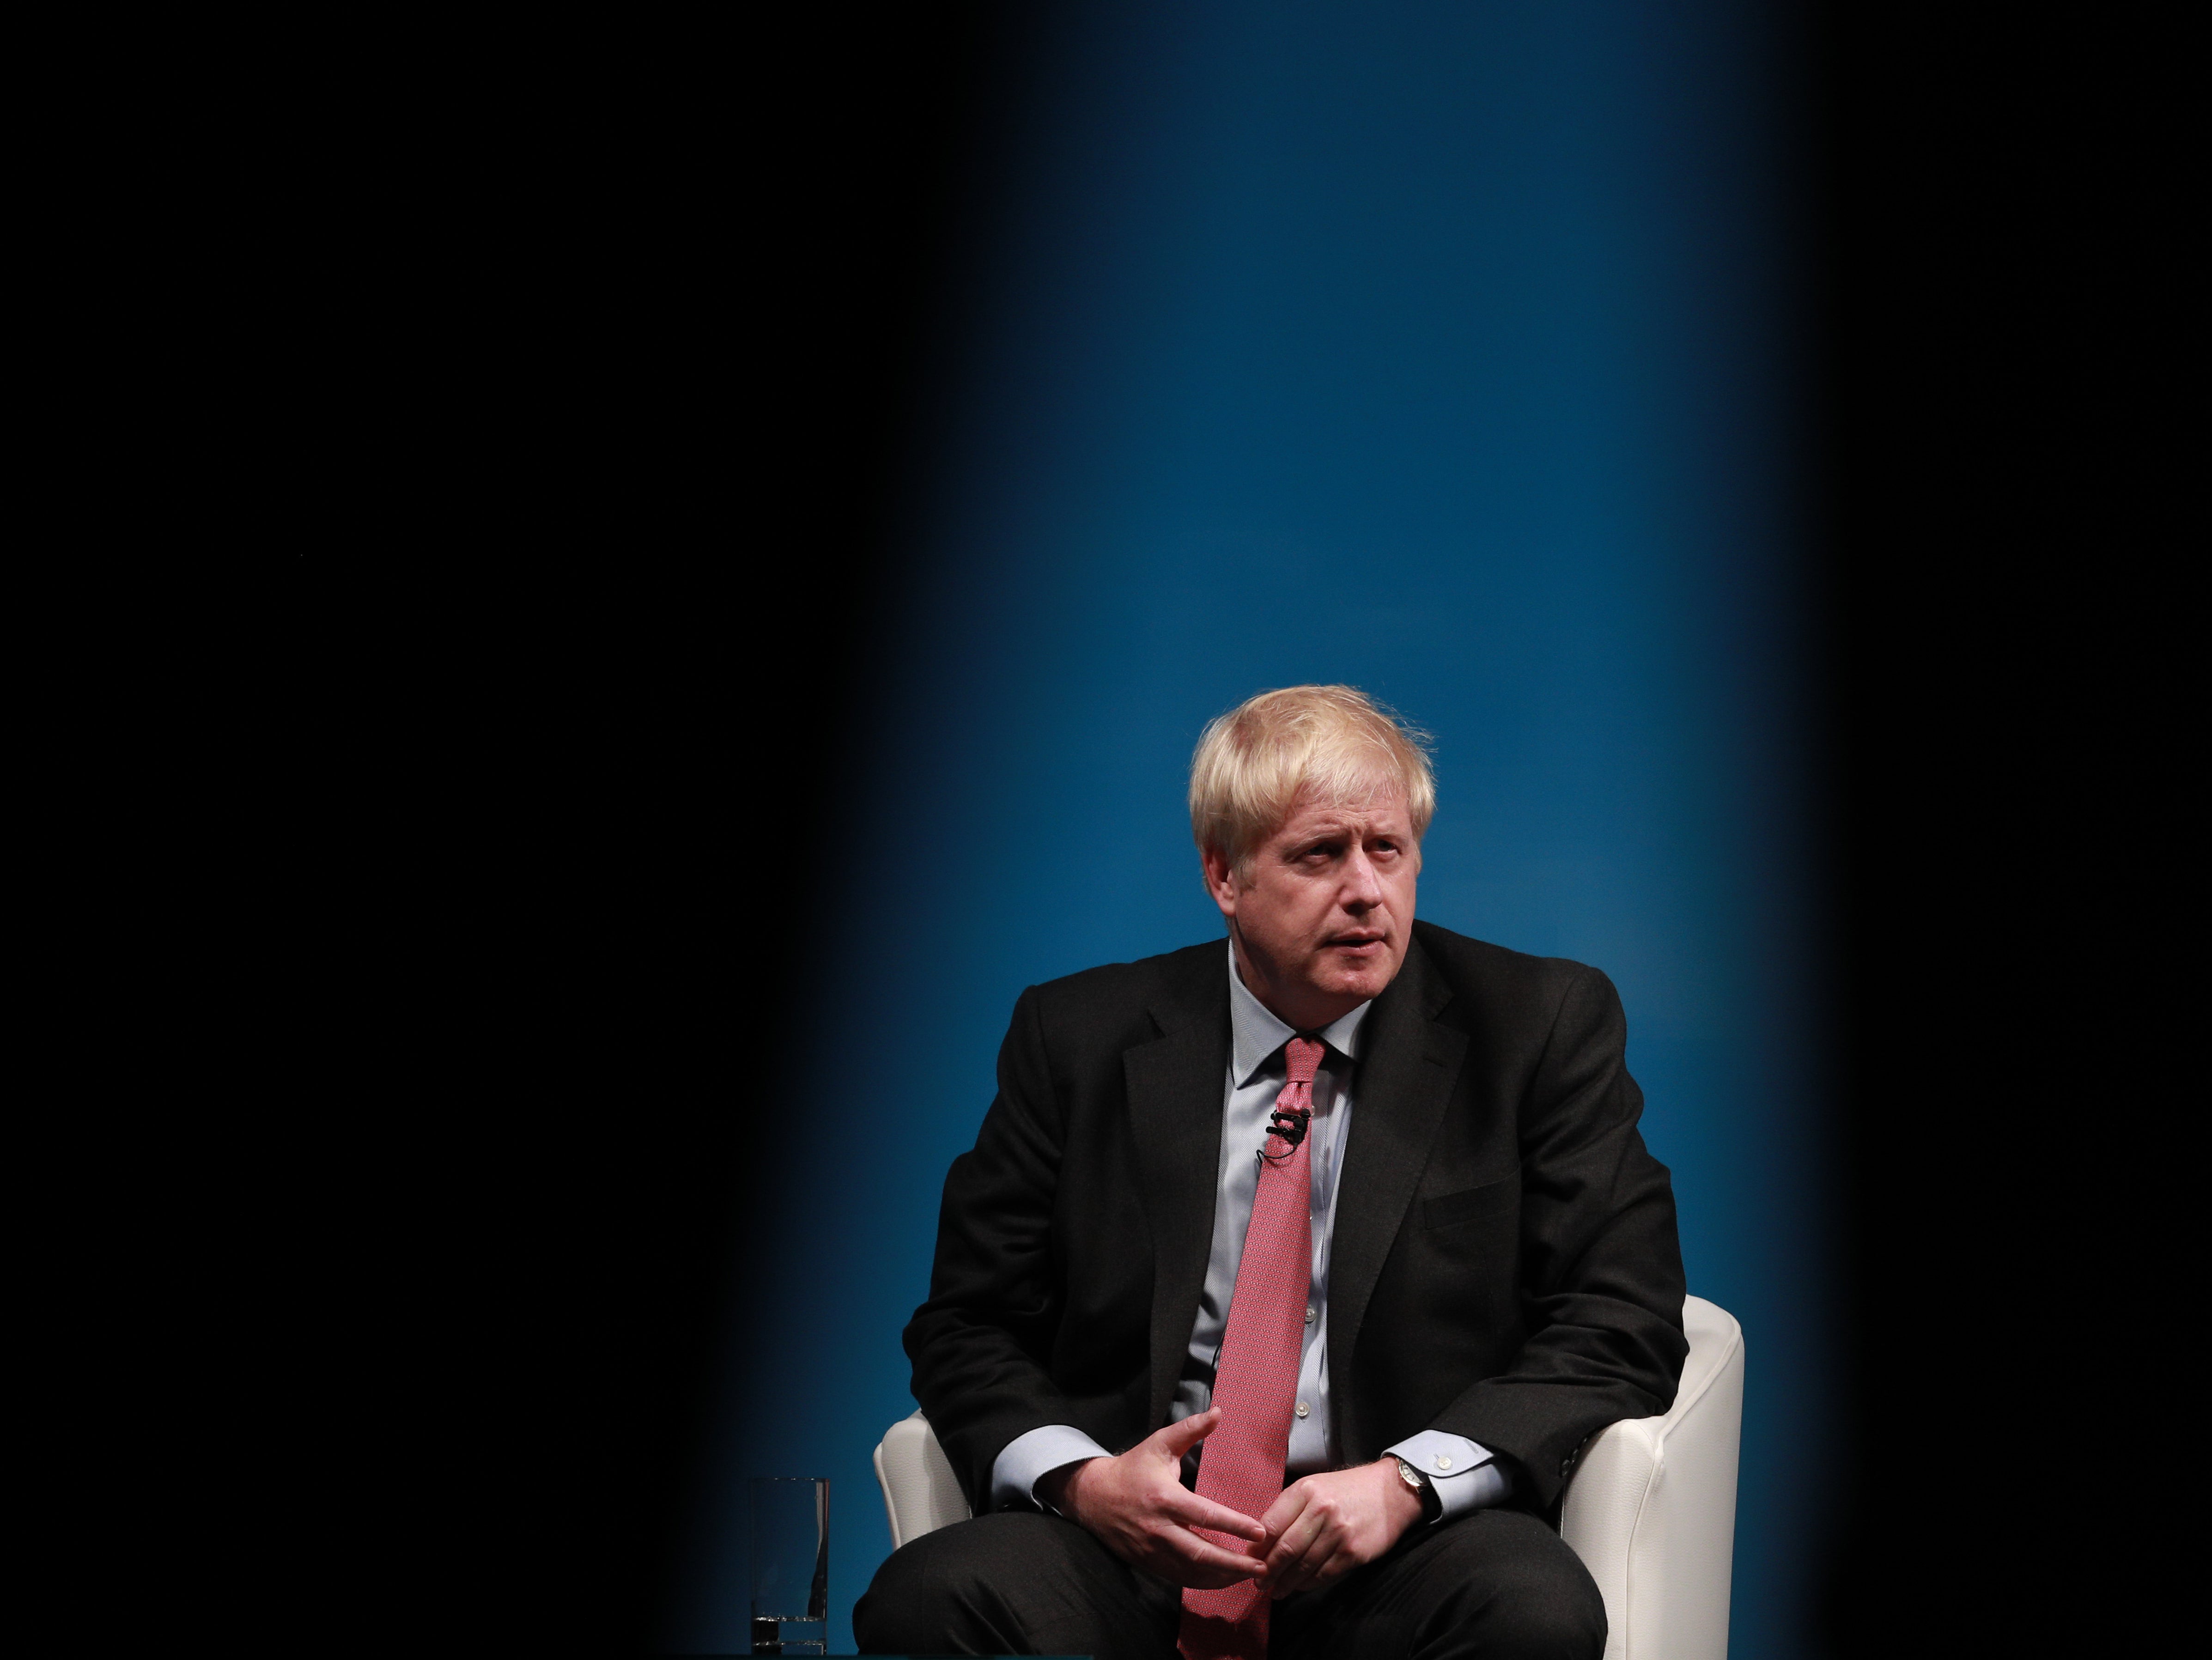 Johnson will surely be prepared to defend Brexit at the Tory conference